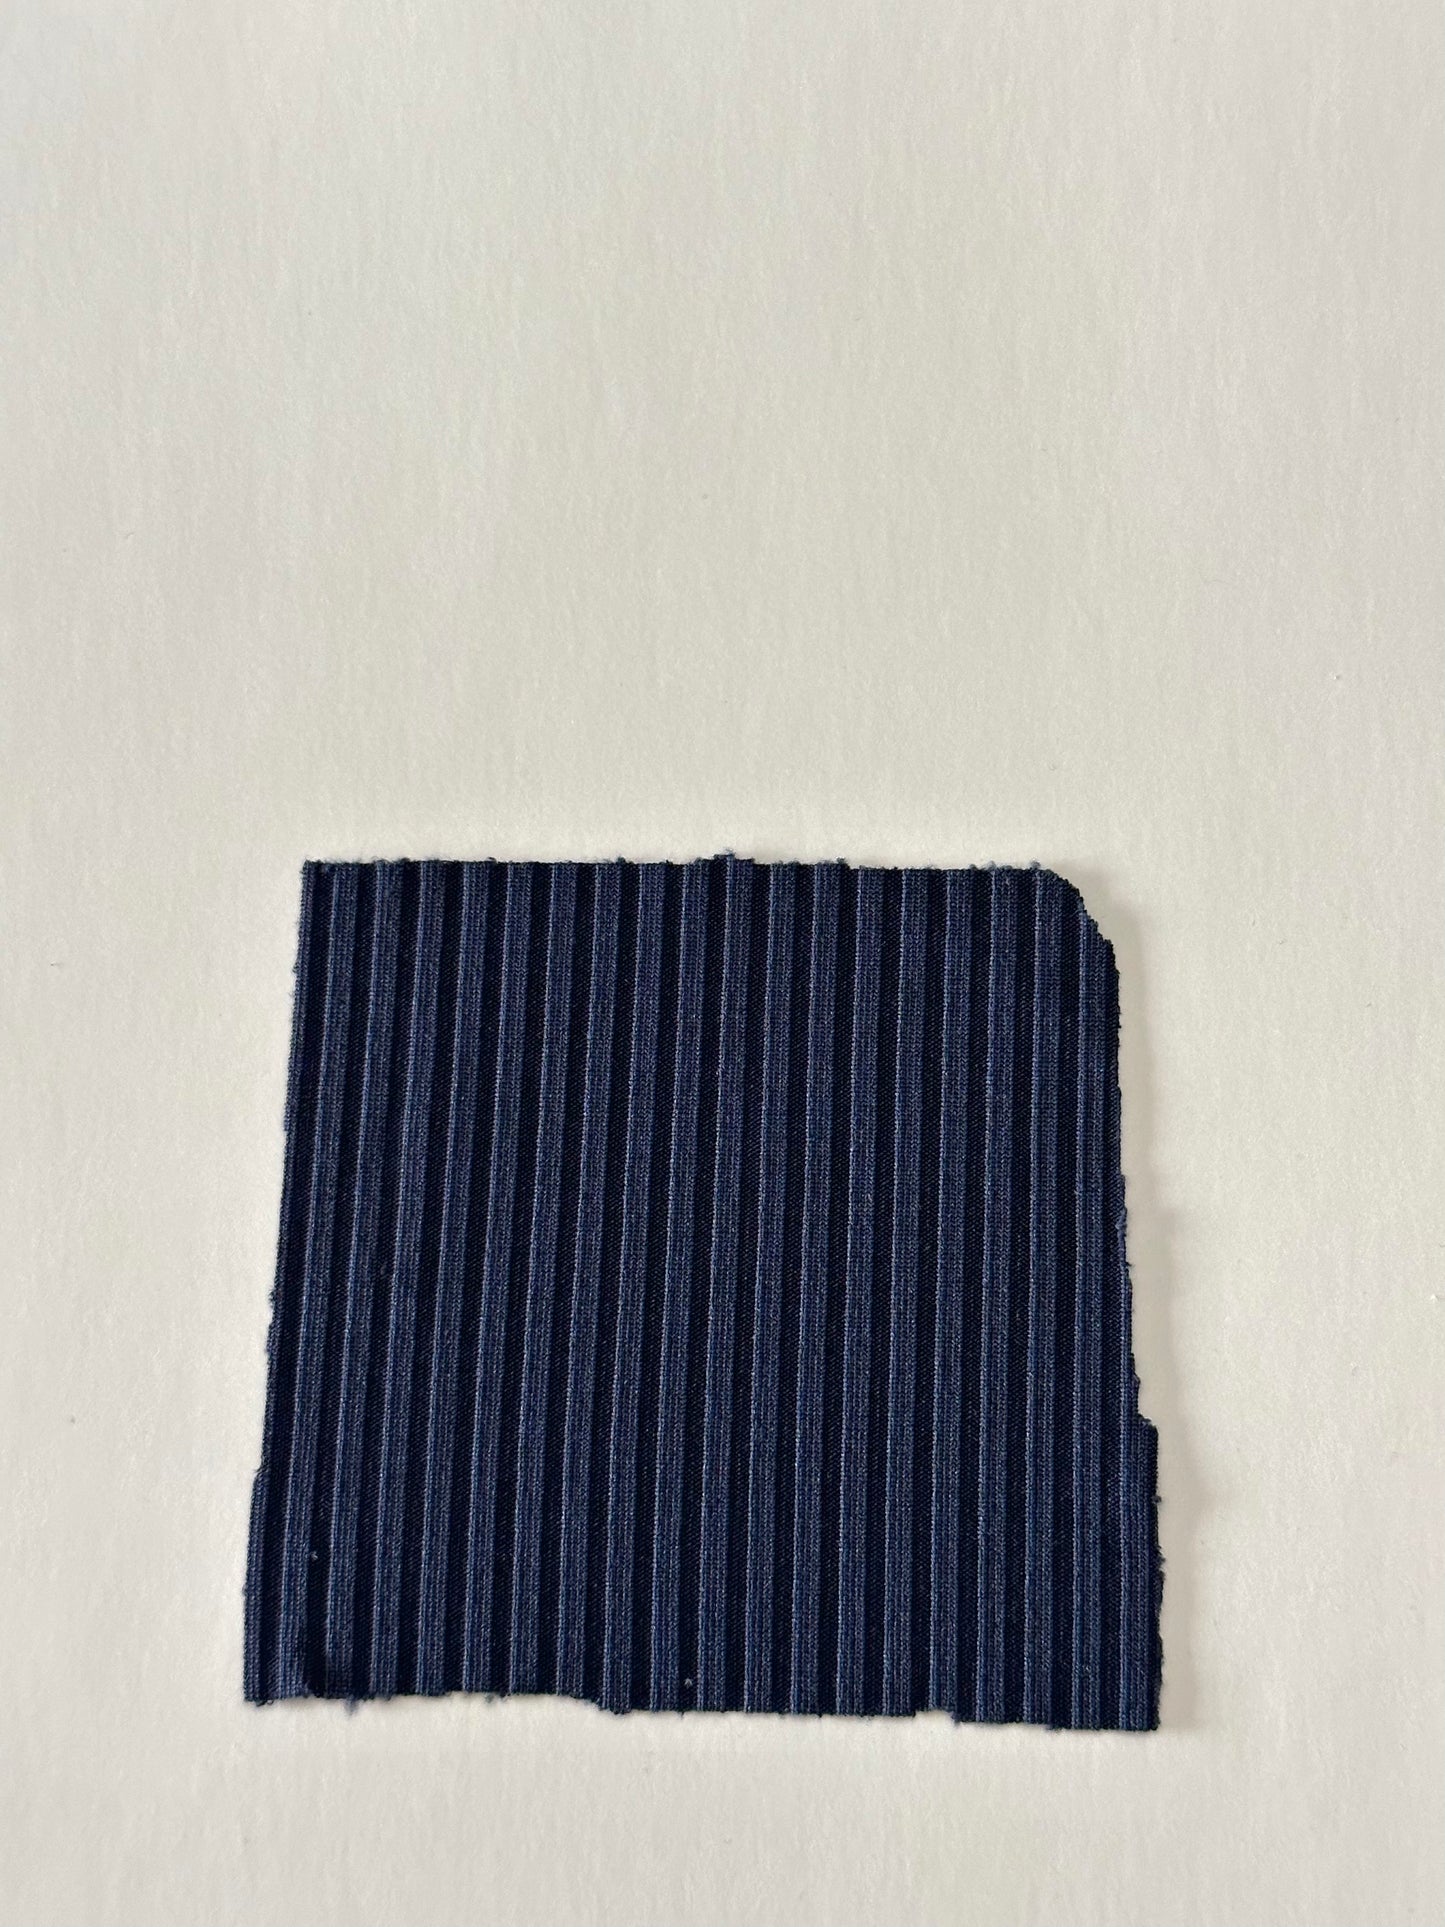 Pre-Order Solid in Navy (new) on Unbrushed Rib Knit Fabric Sold by the 1/4 yard